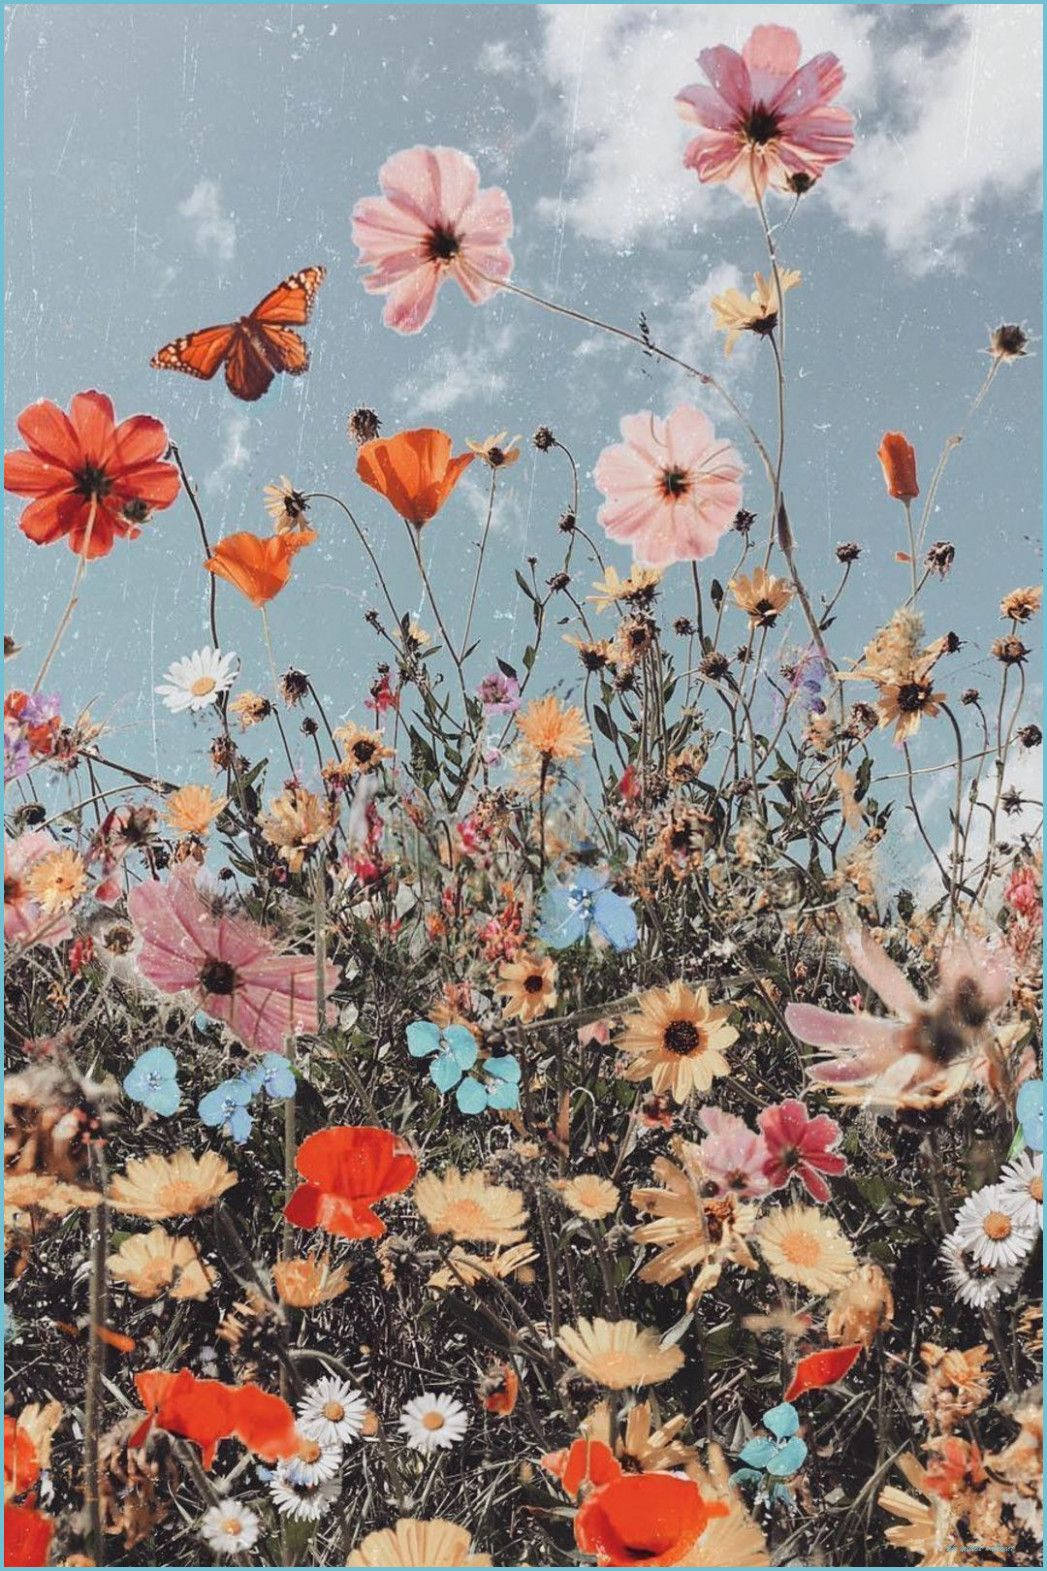 A field of flowers with a butterfly in the sky - Boho